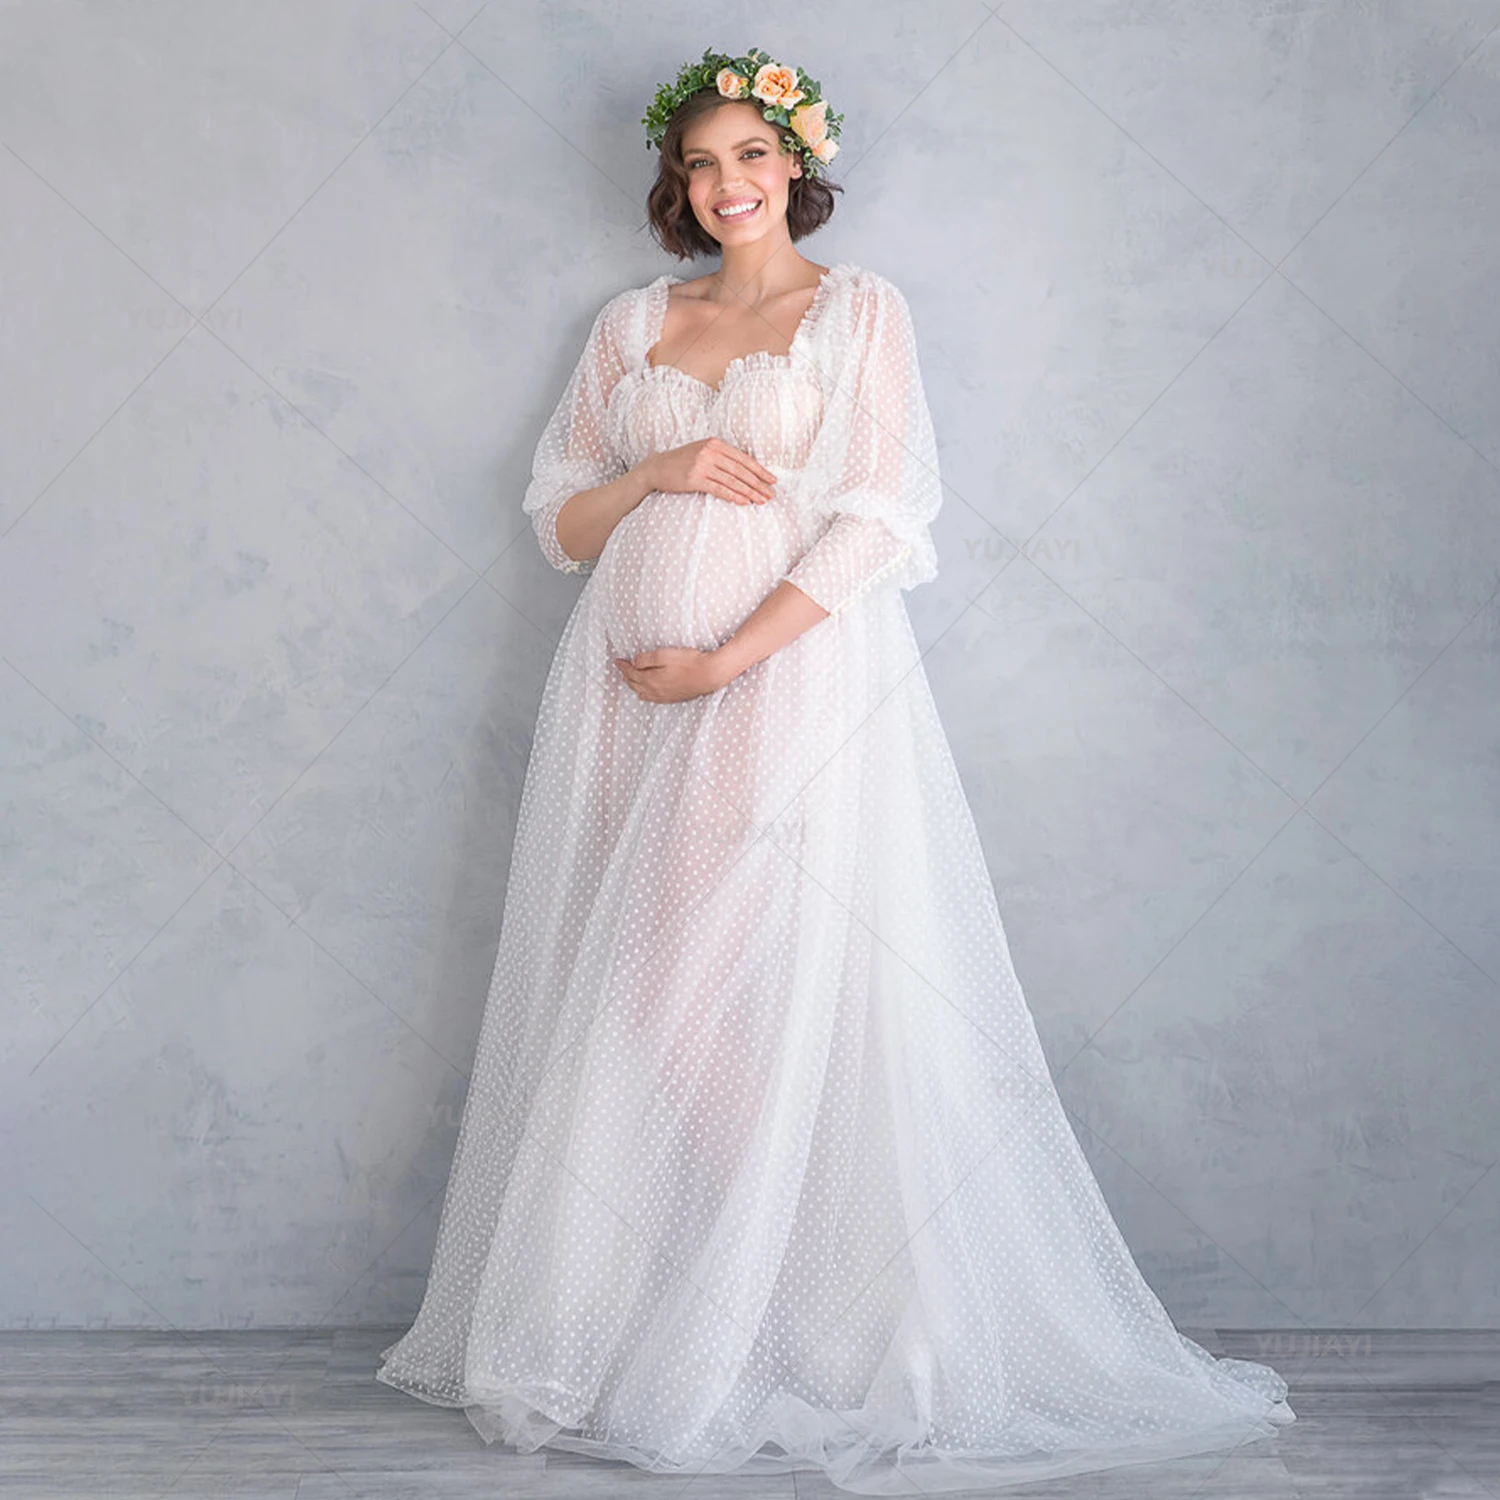 

White Maternity Robes Ruffled Tulle Photo Shoot Gowns Sheer Puffy Tulle Maternity Dress for Photography Bridal Wedding Dresses